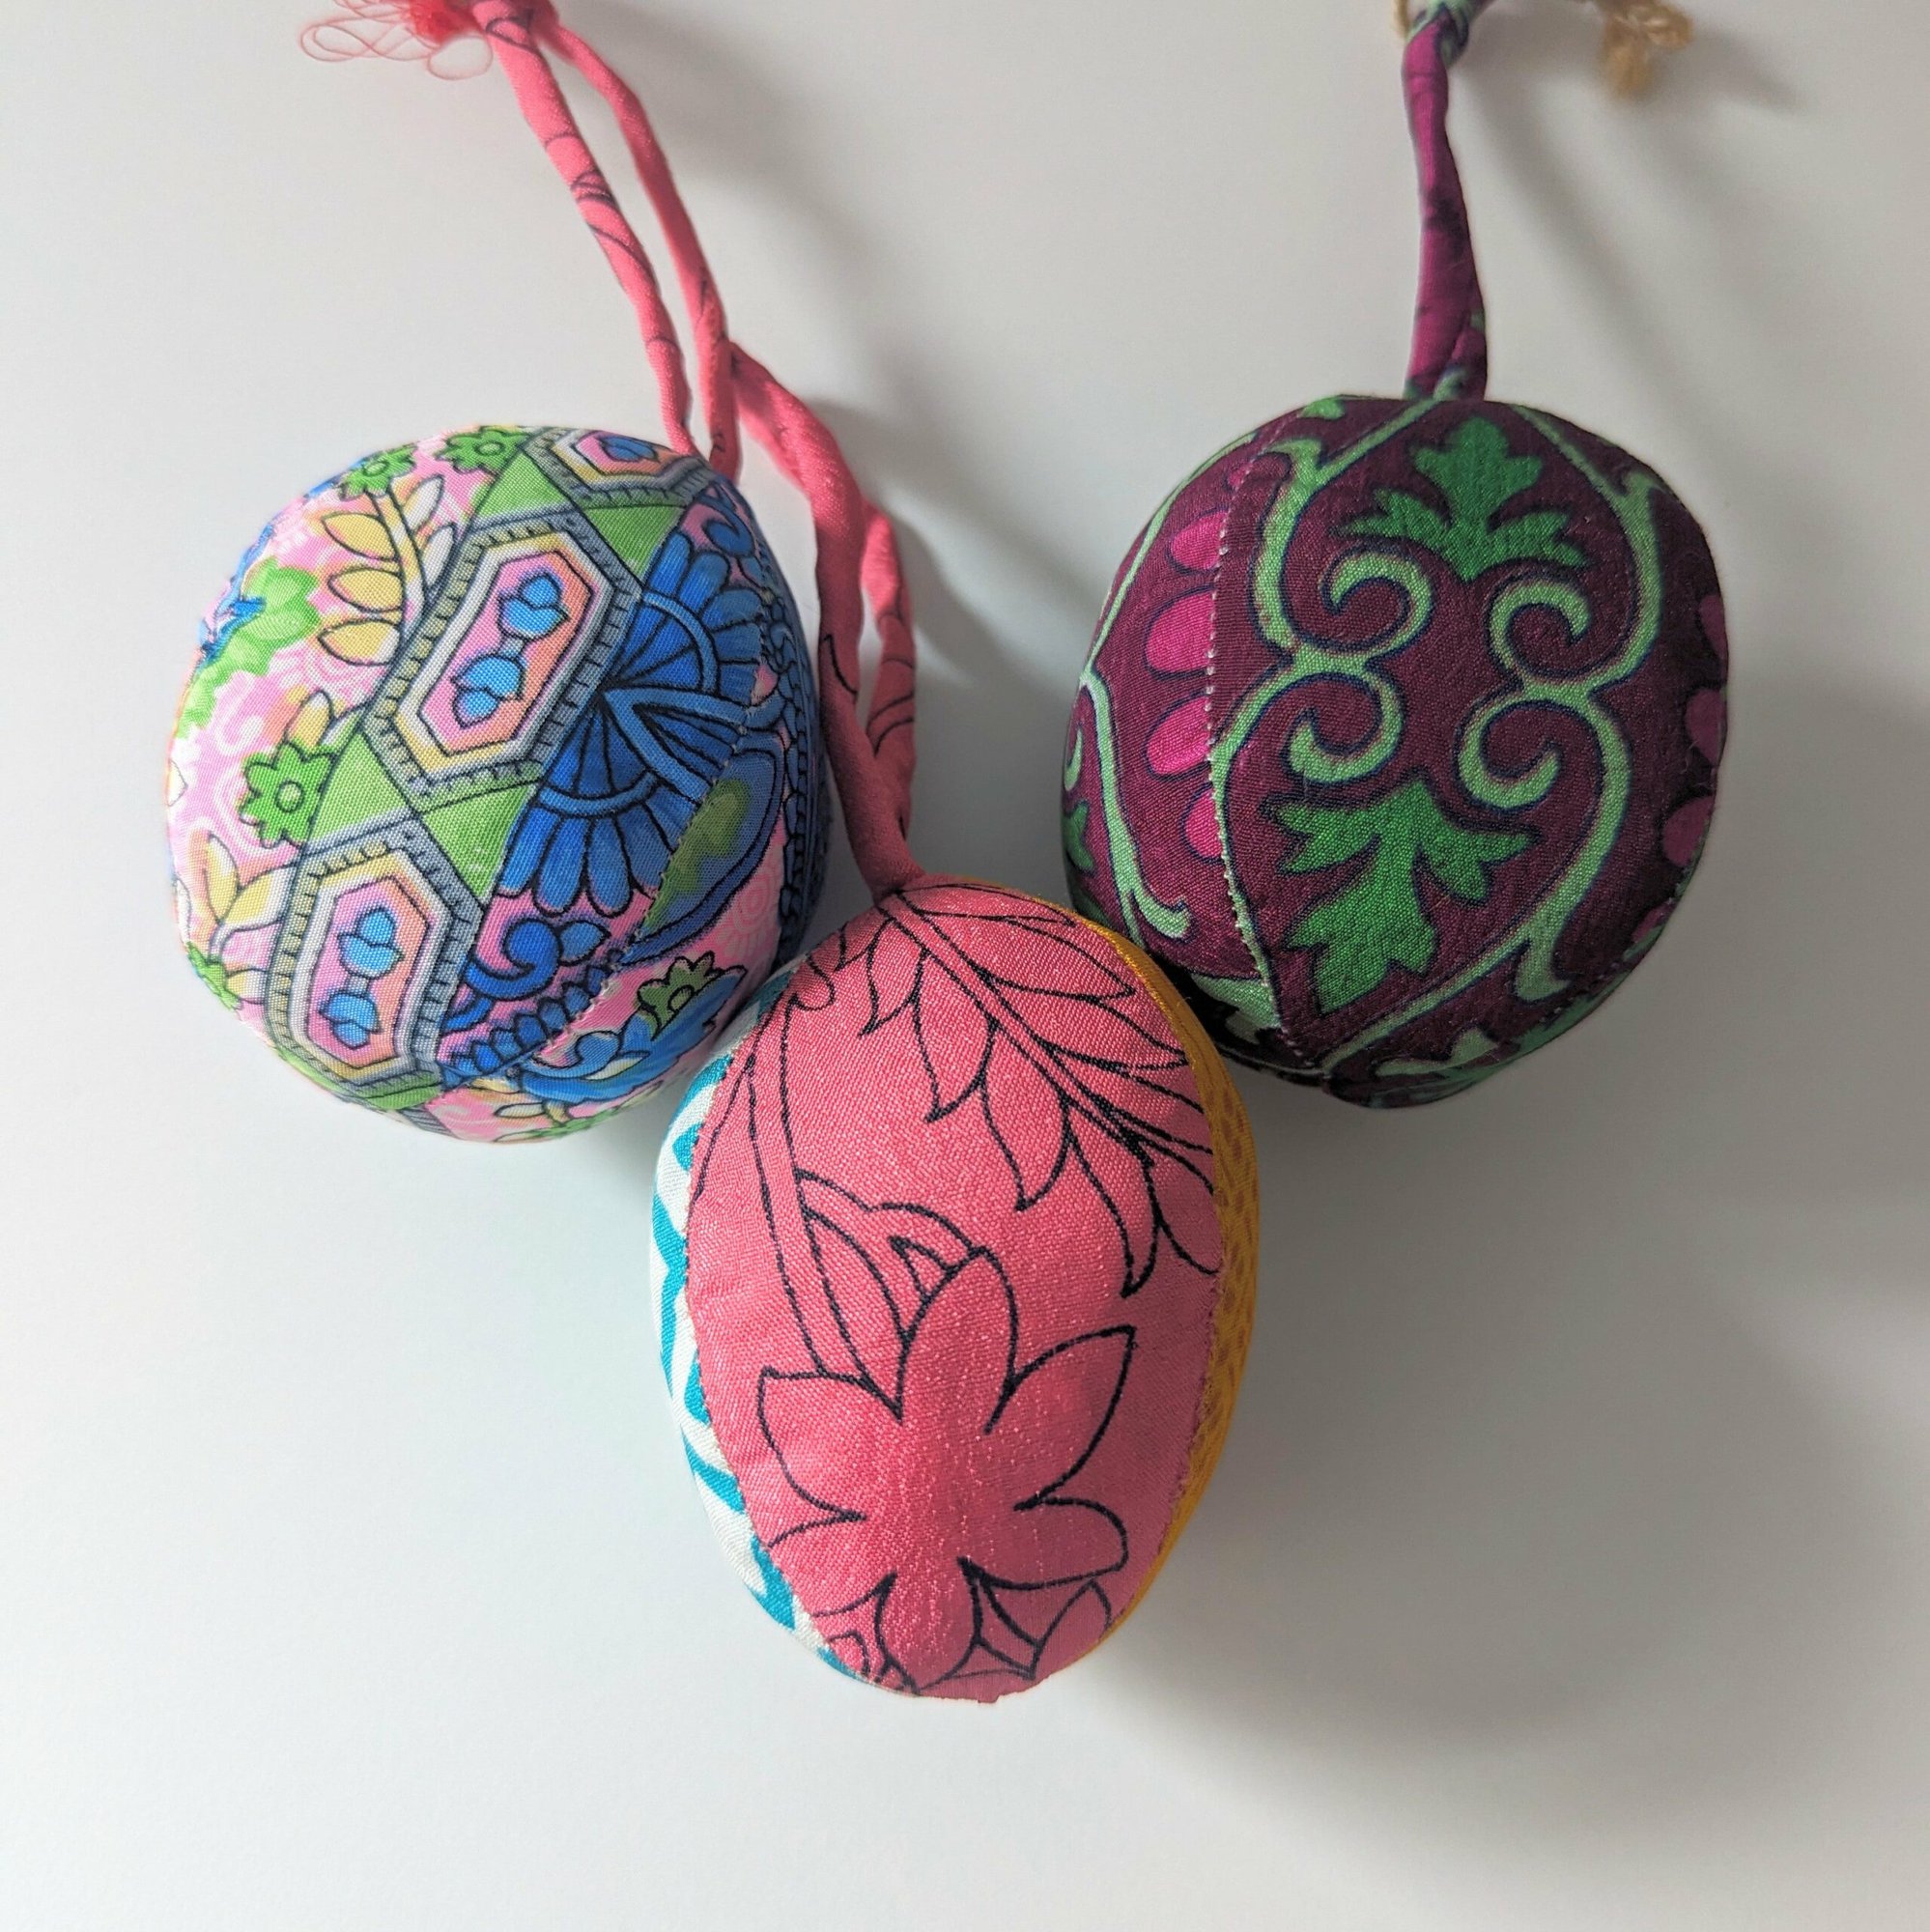 Hanging Egg Decorations 3 Pack - Multi